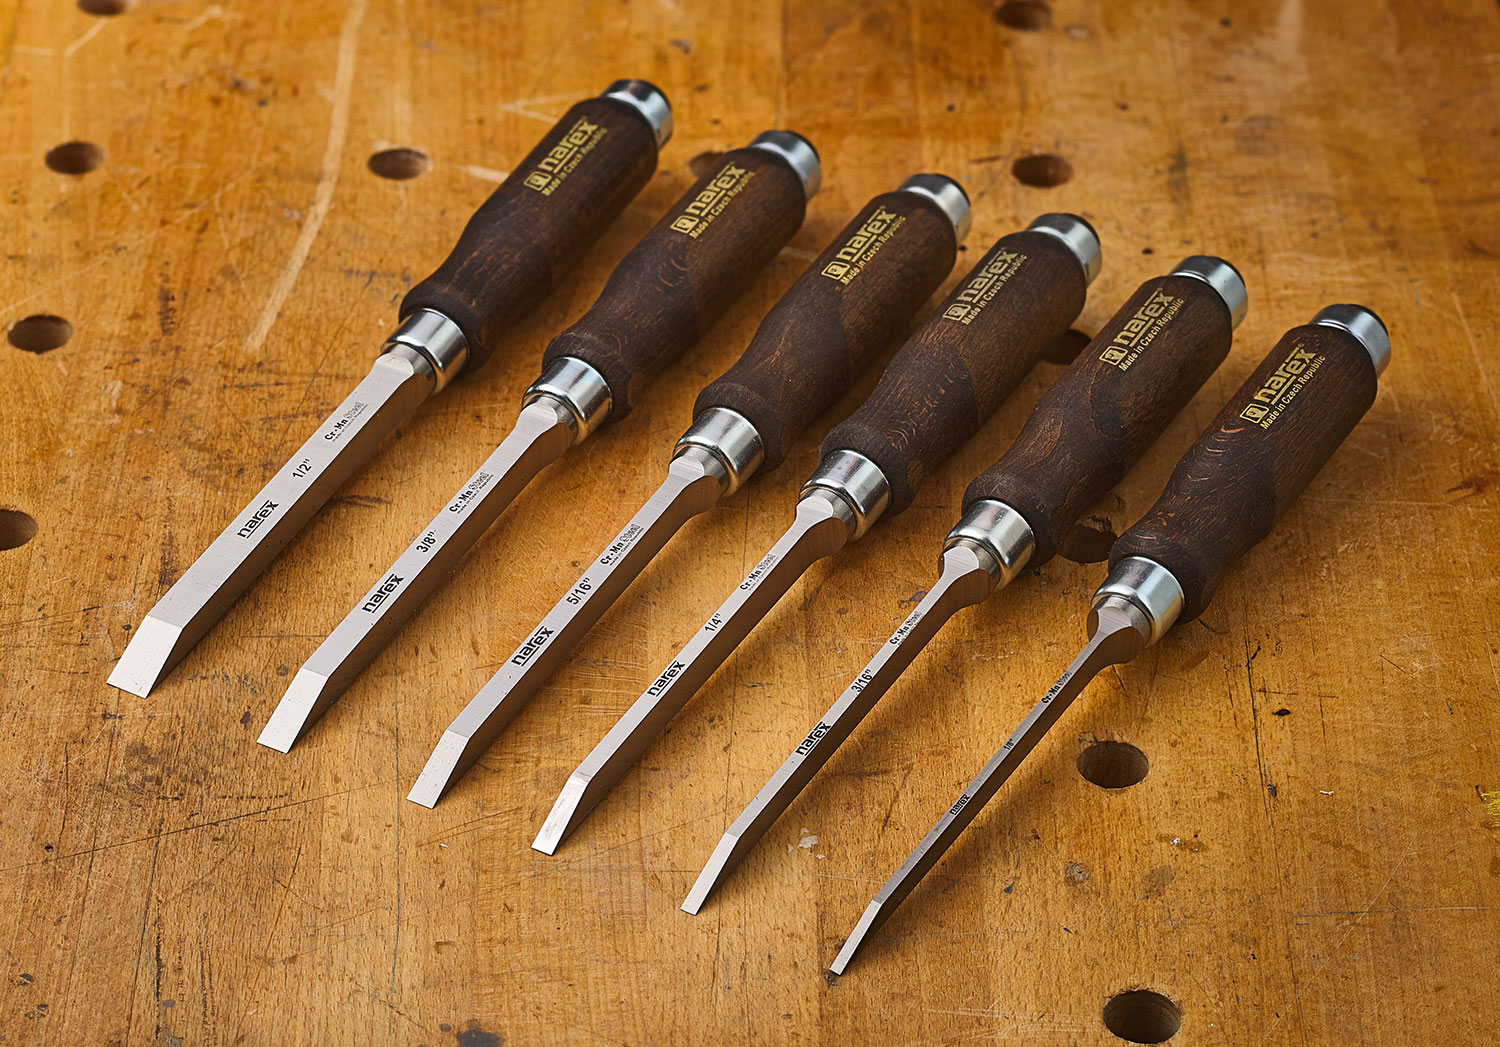 Five Narex mortise chisels lined up on a workbench.